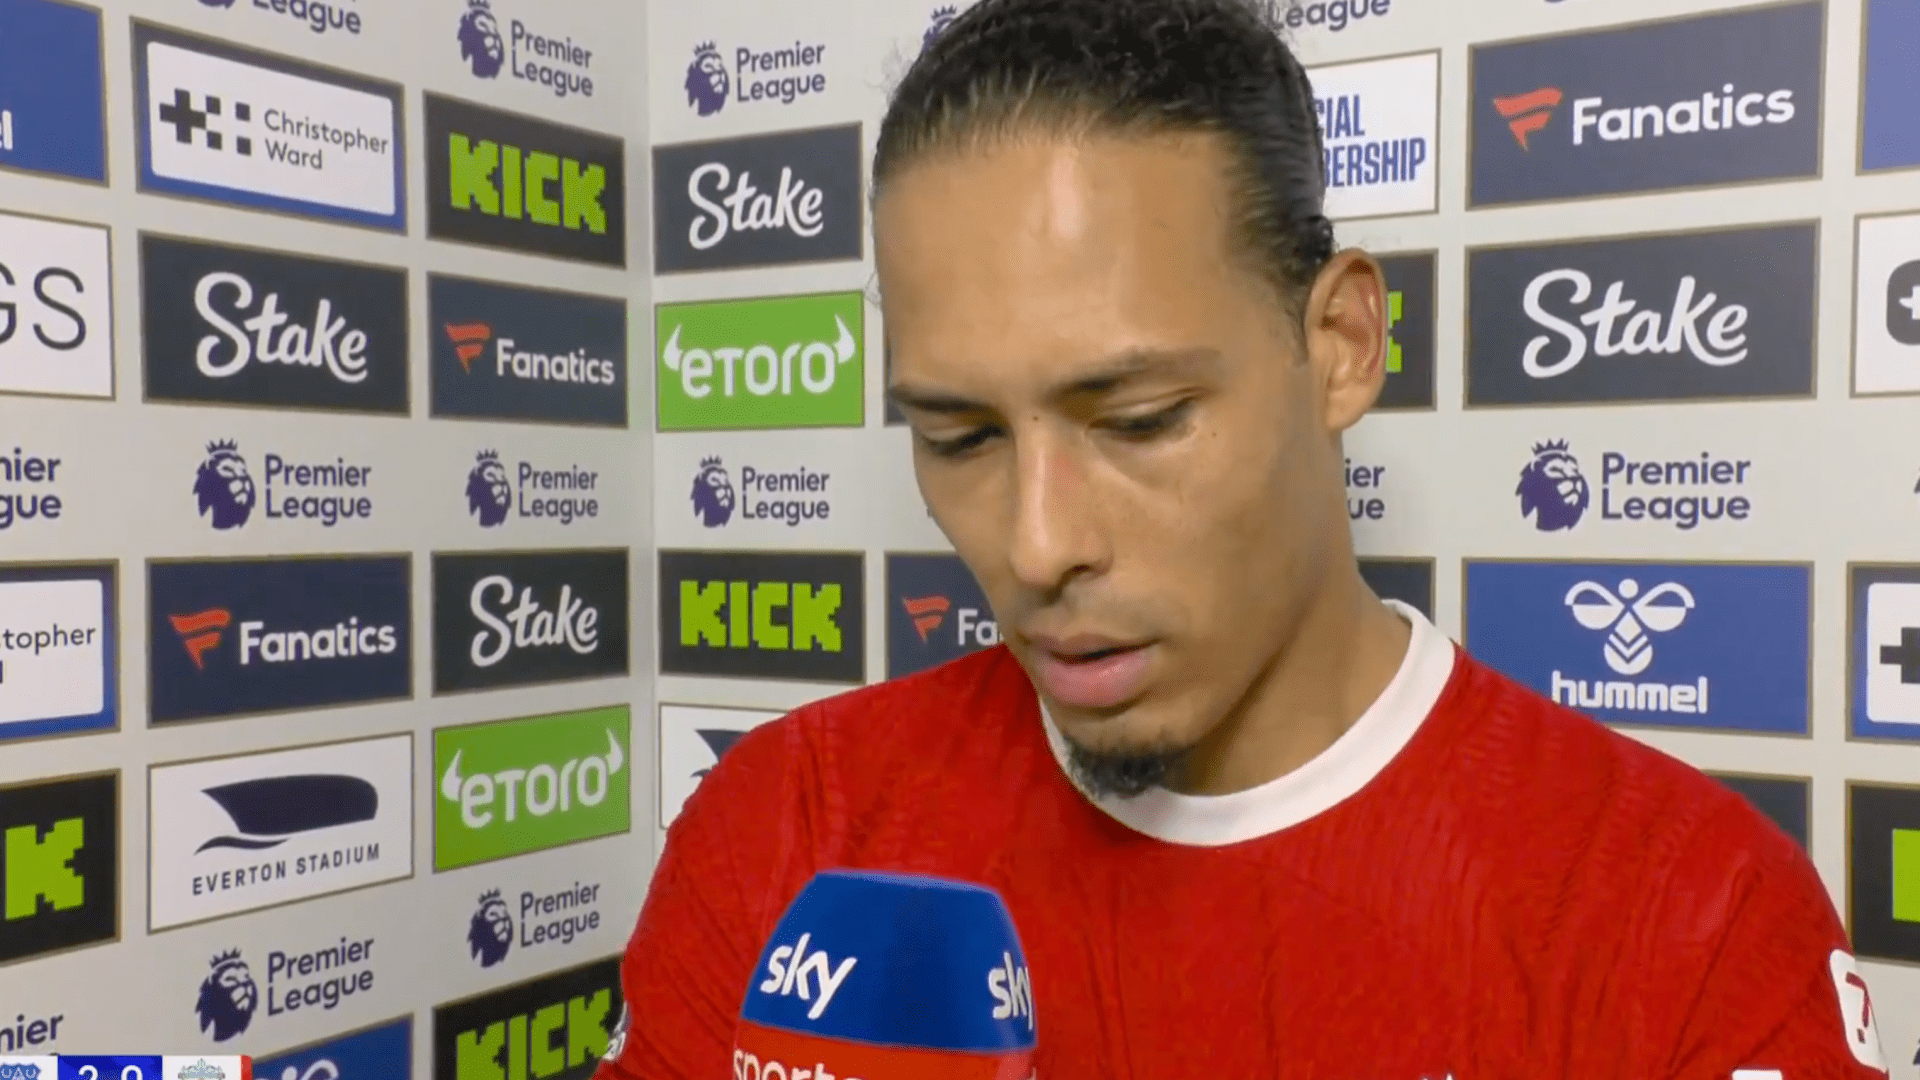 Brutal Virgil van Dijk says ‘everyone has to look in the mirror’ and asks whether team-mates ‘really want to win league’ [Video]